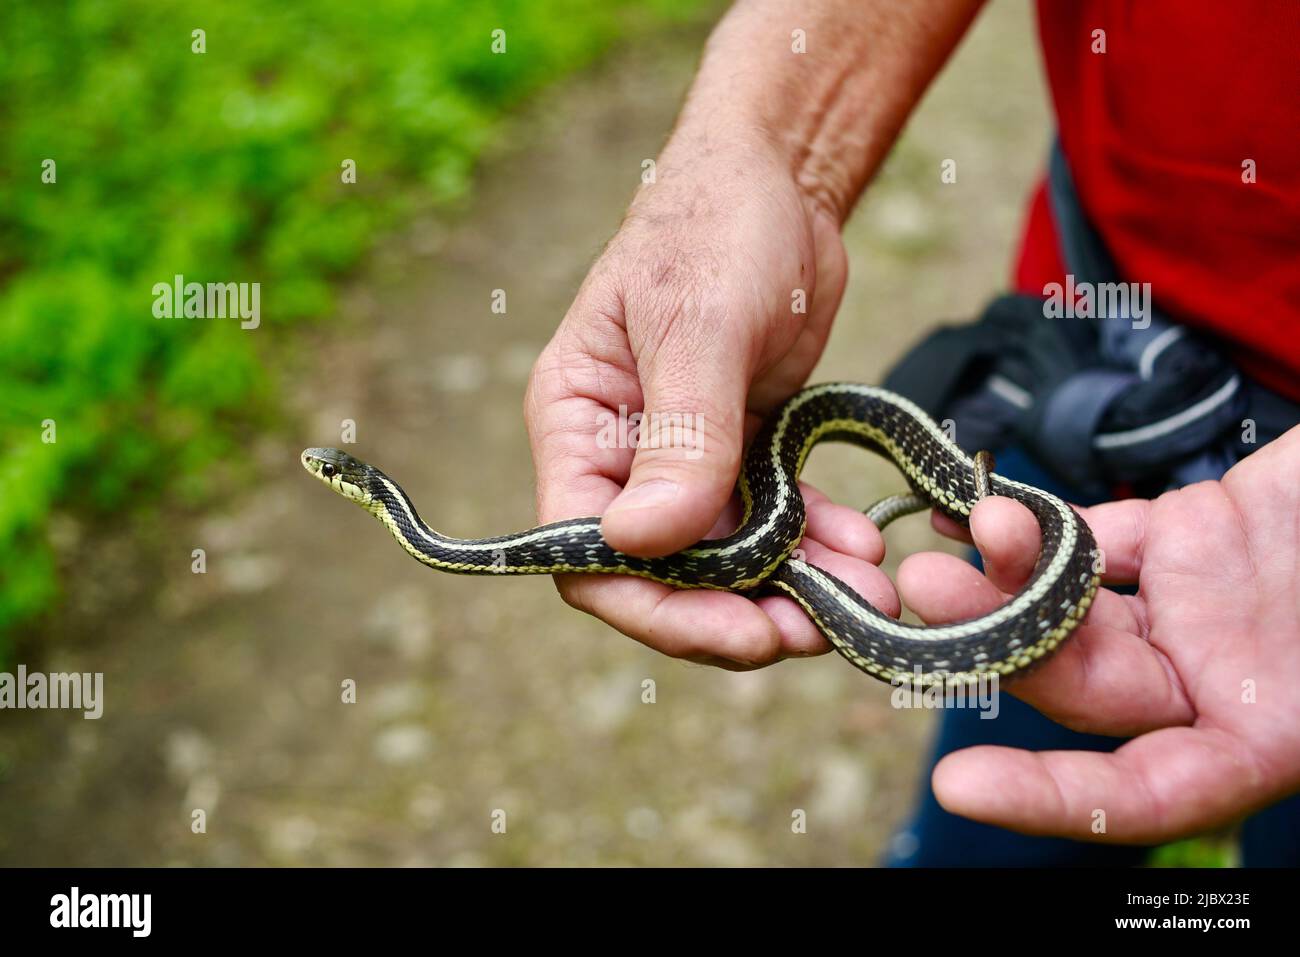 Male hiker holding small garter snake found on Ice Age National Scenic Trail, Elkhart Lake, Wisconsin, USA Stock Photo